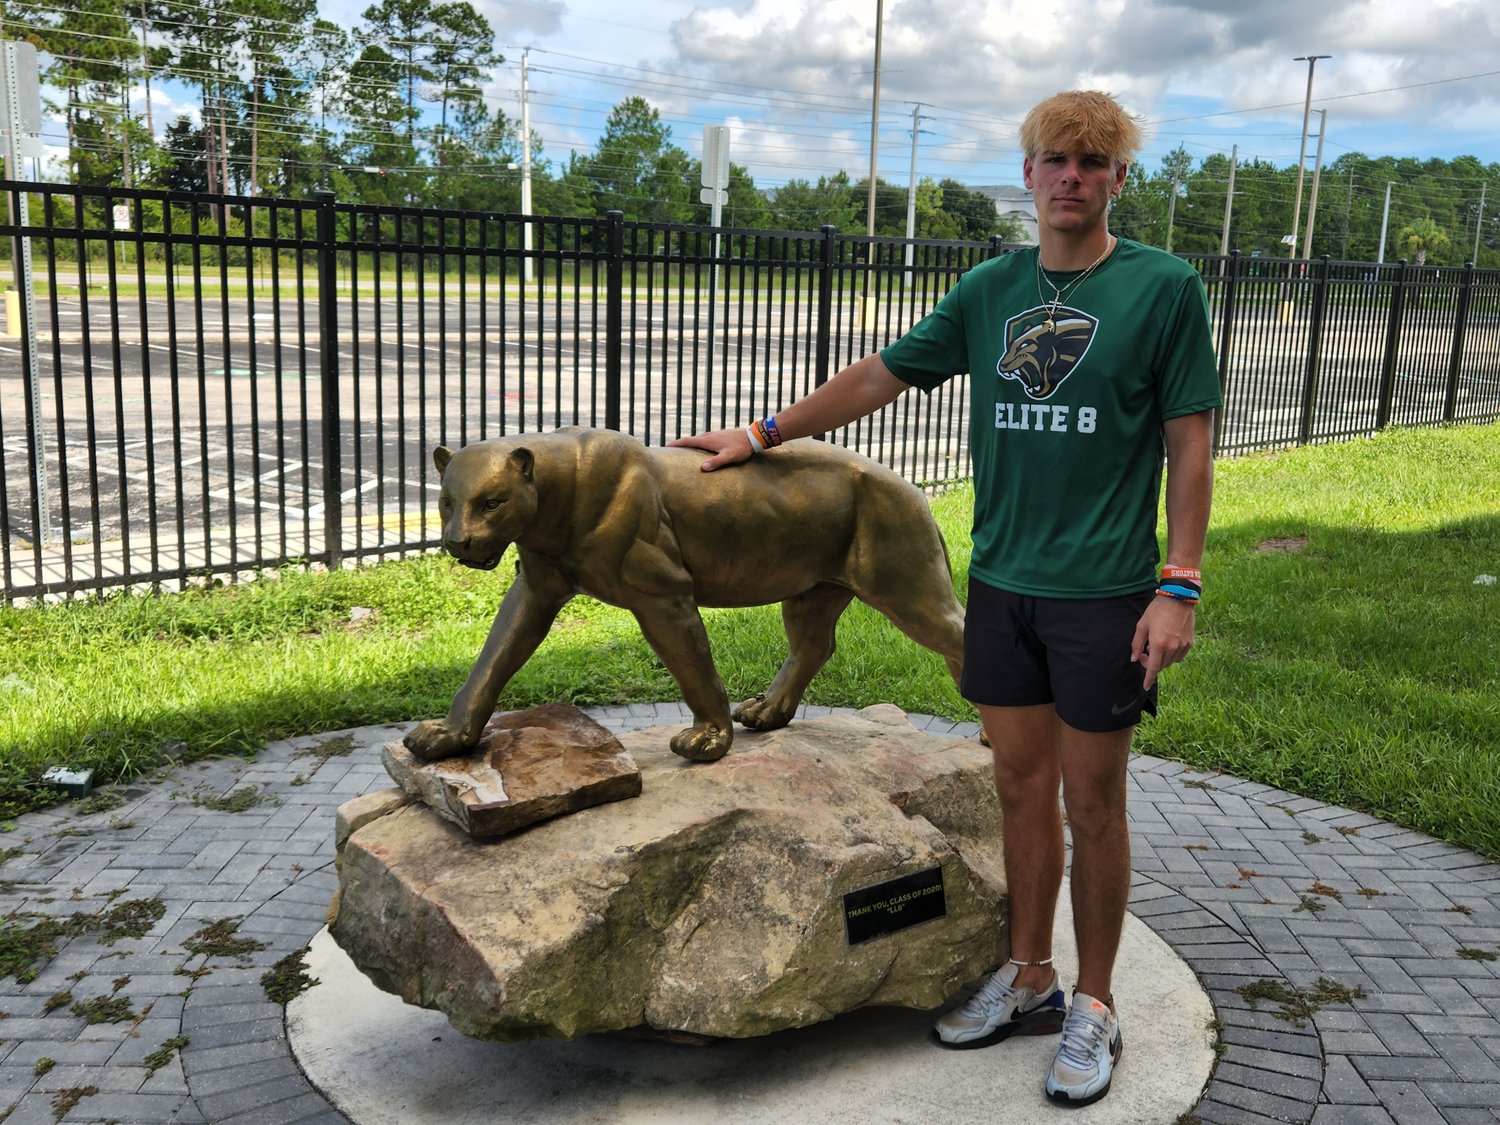 Marcus Stokes has represented Nease High during a busy summer involving recruiting trips and national camps.